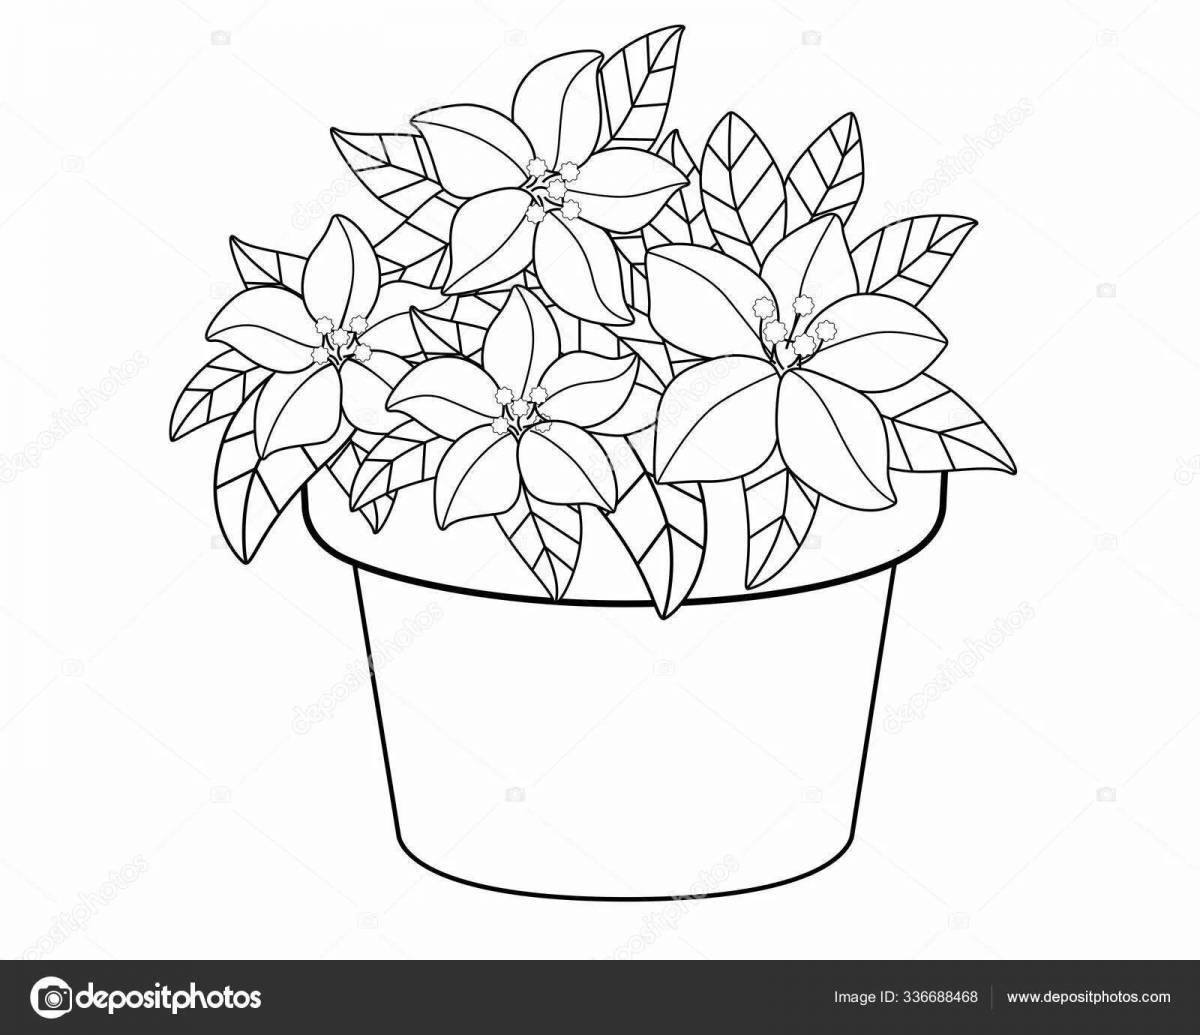 Adorable flower pot coloring book for kids